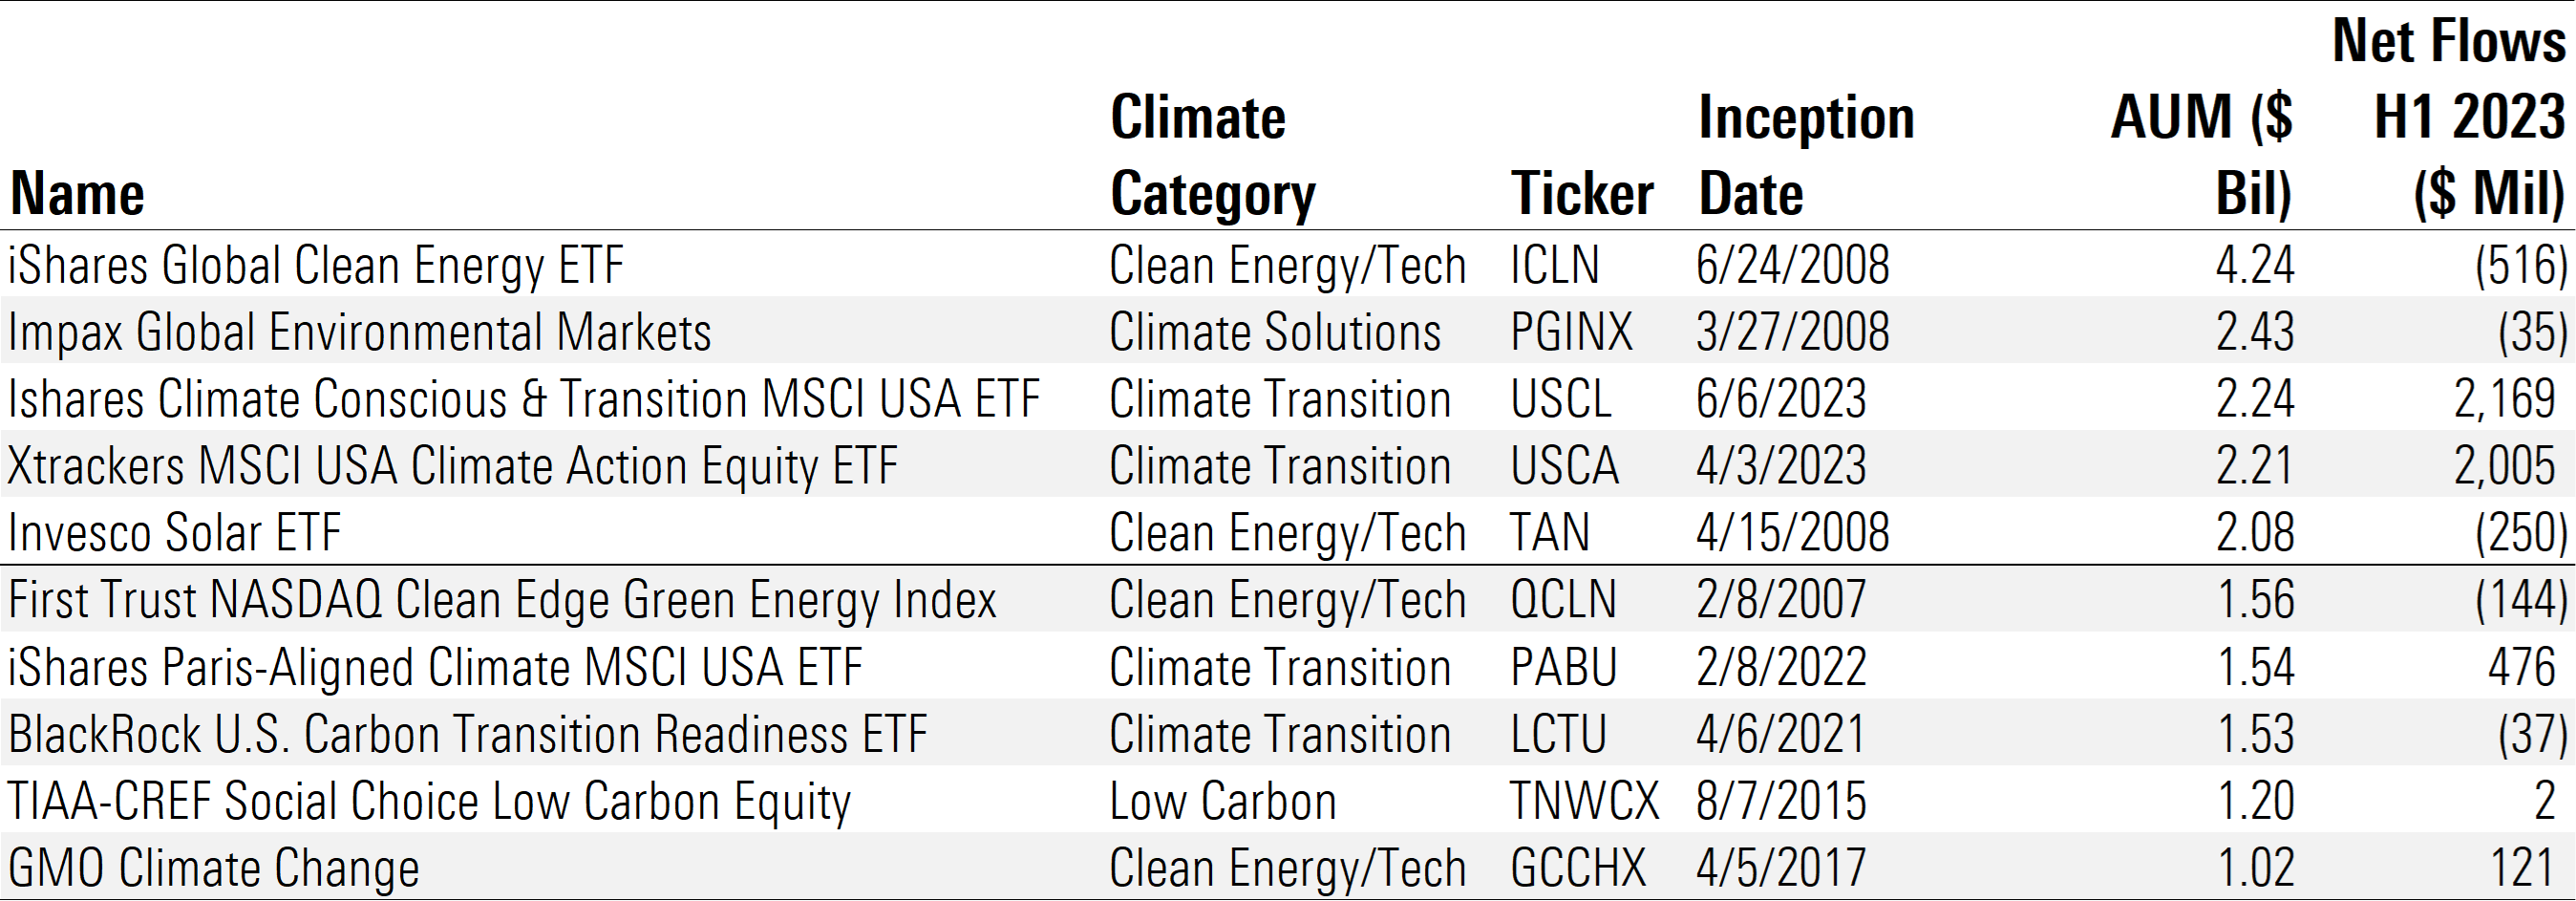 Table showing the 10 largest U.S. climate funds